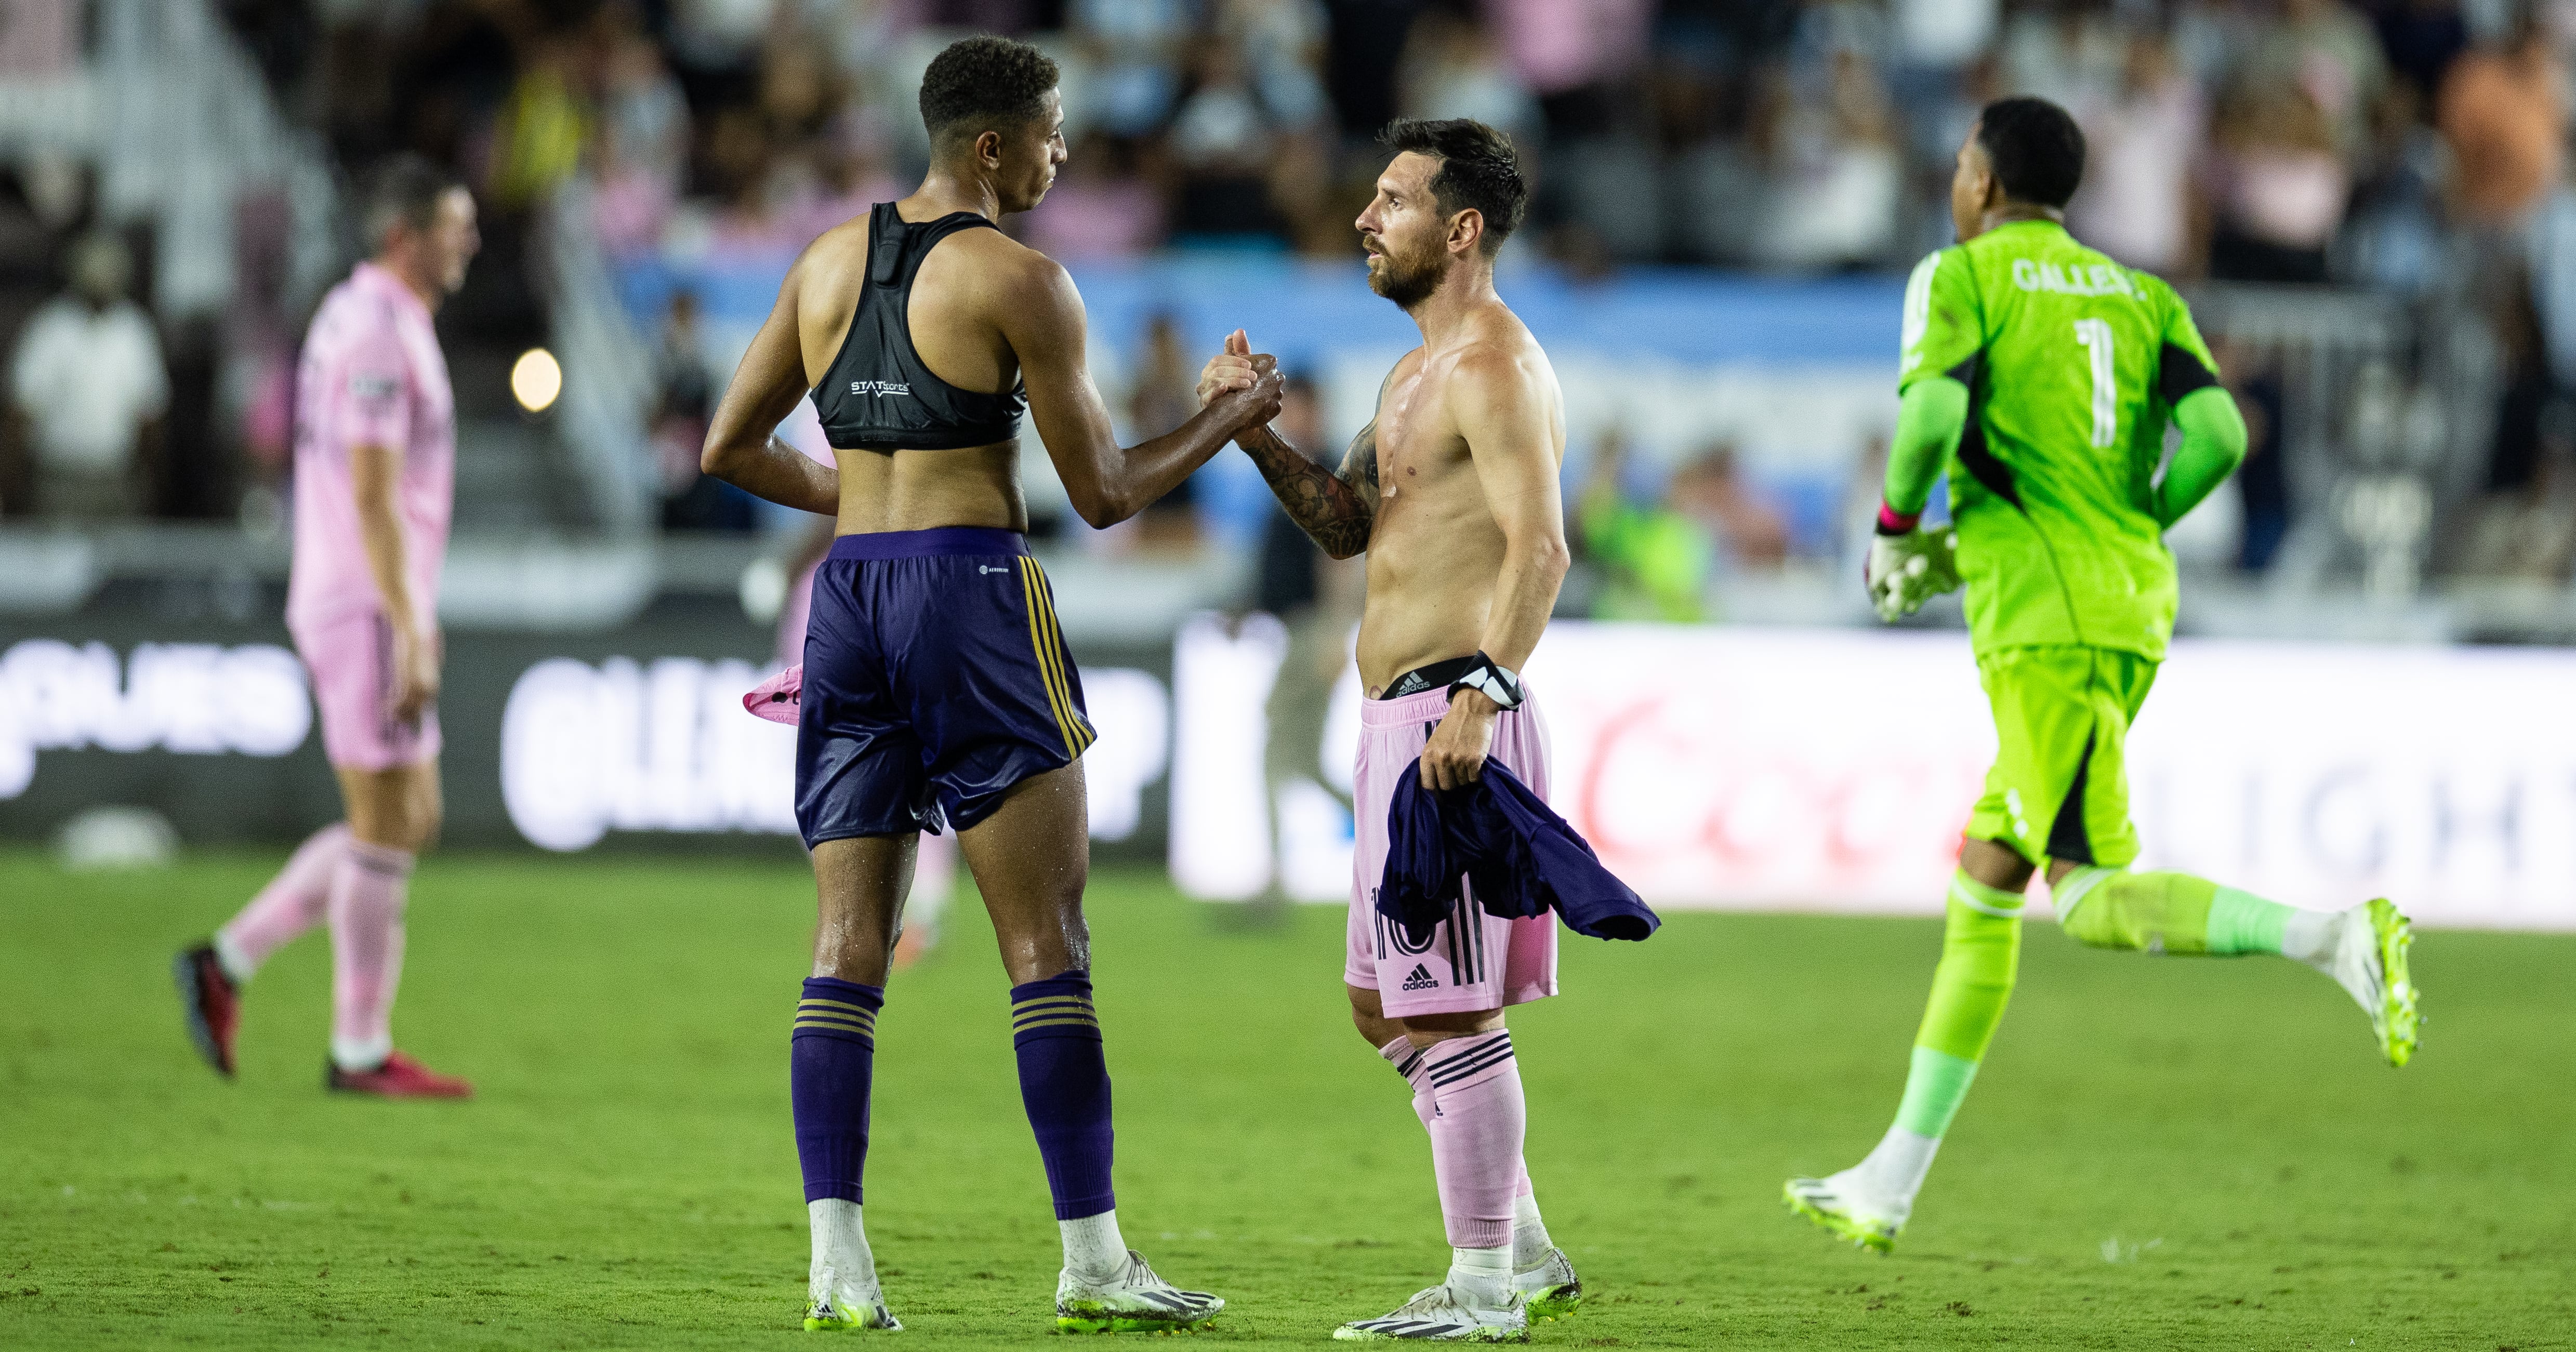 Explained: Why are footballers wearing 'sports bras' at FIFA World